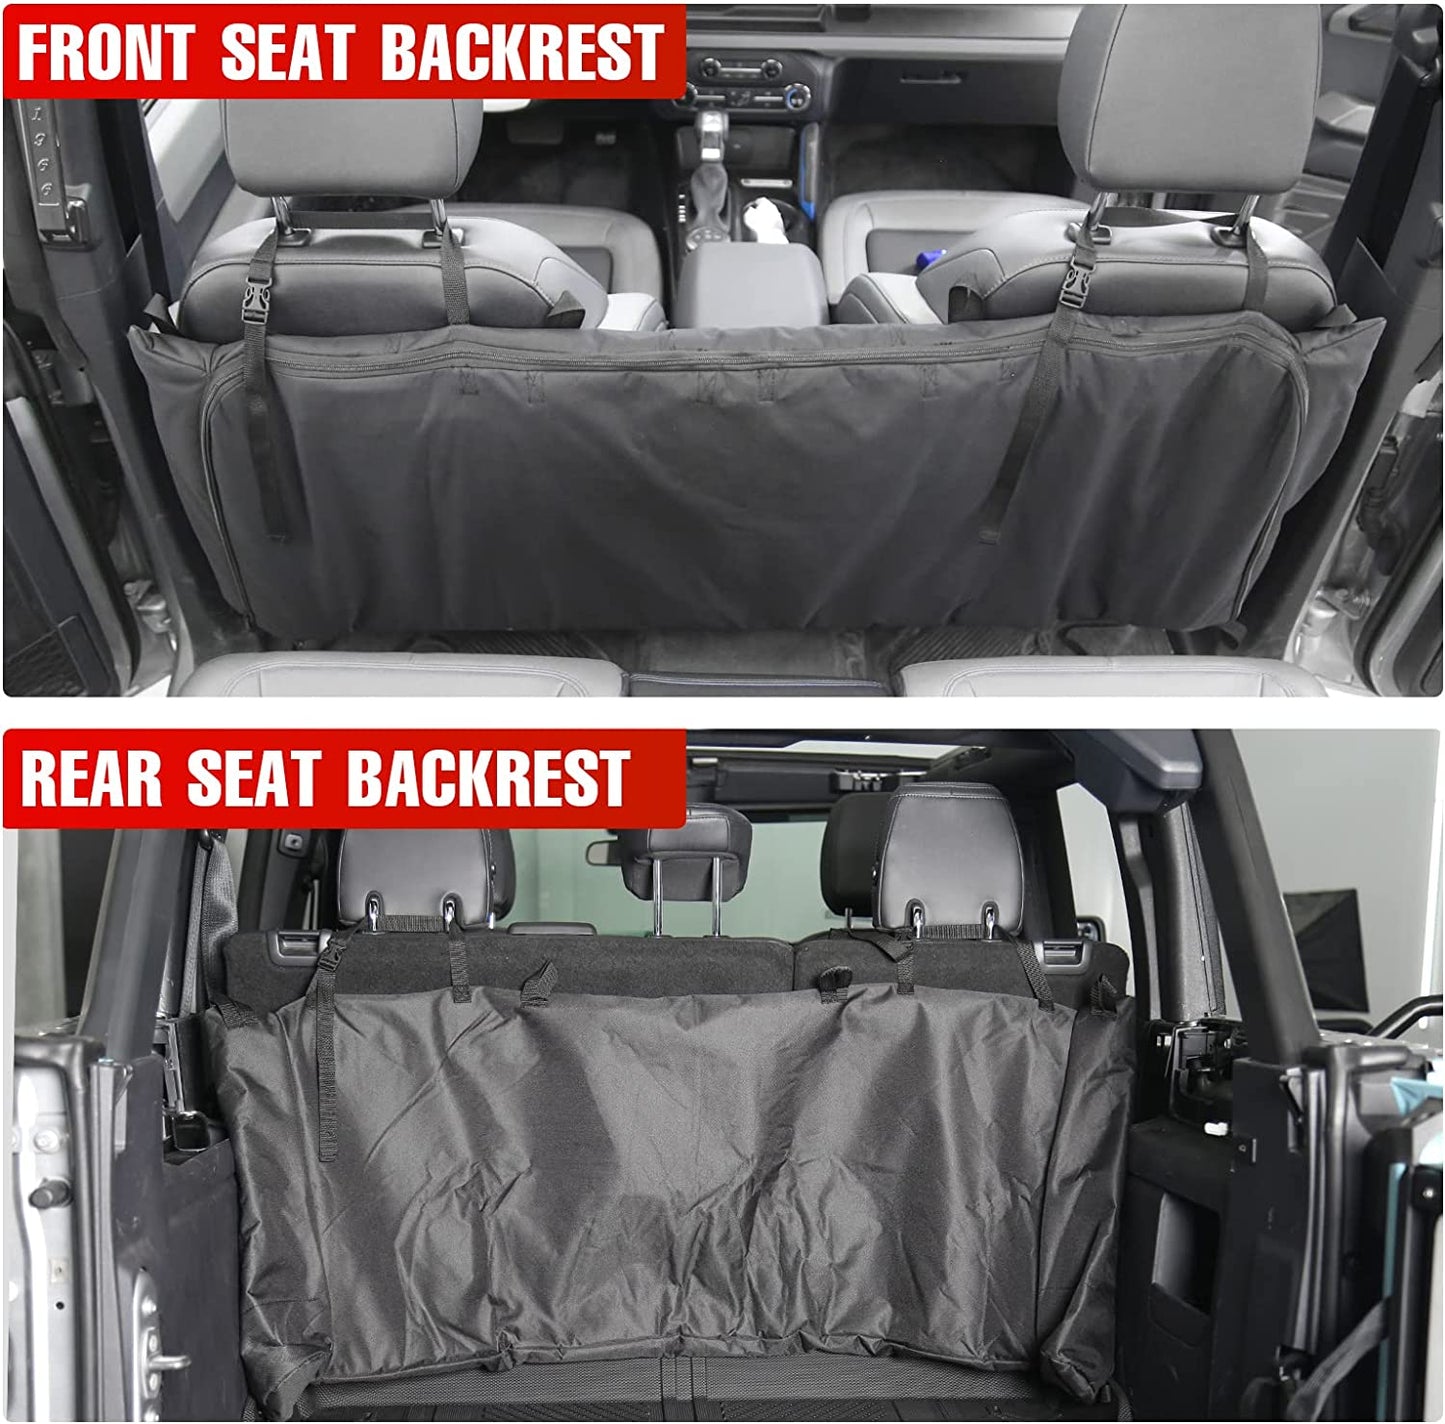 Soft Top Window Storage Bag for Ford Bronco Accessories 2021 2022